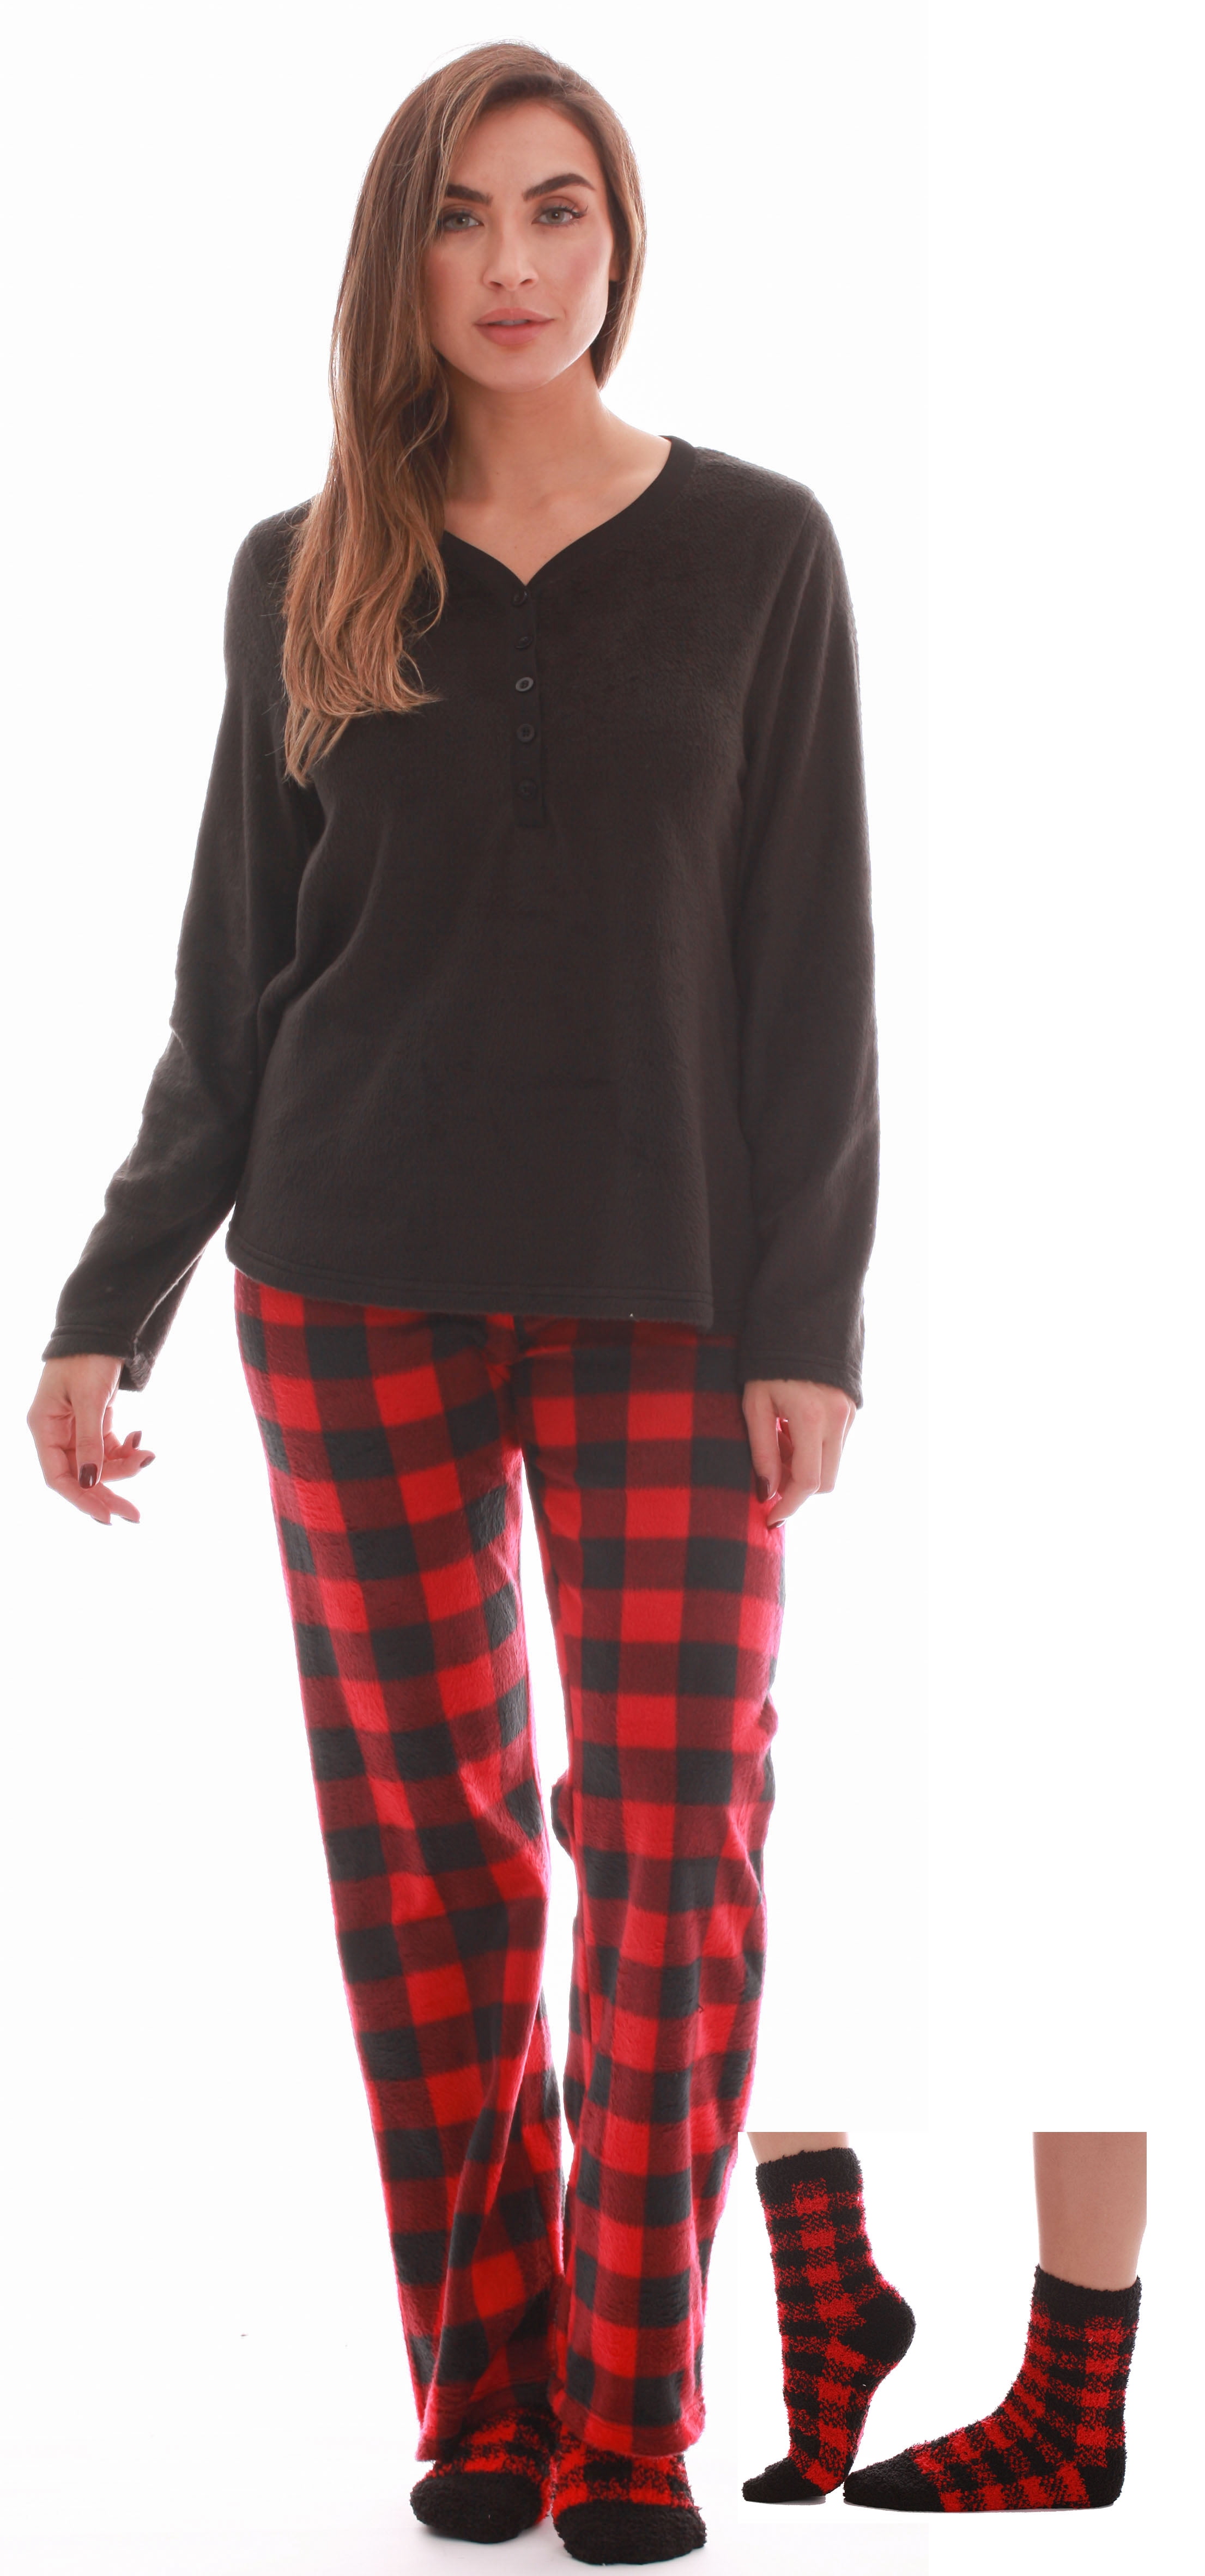 Details about    Women’s Ultra-Soft Pajama Pant Set with Matching Fuzzy Socks,XLarge,Red Black 